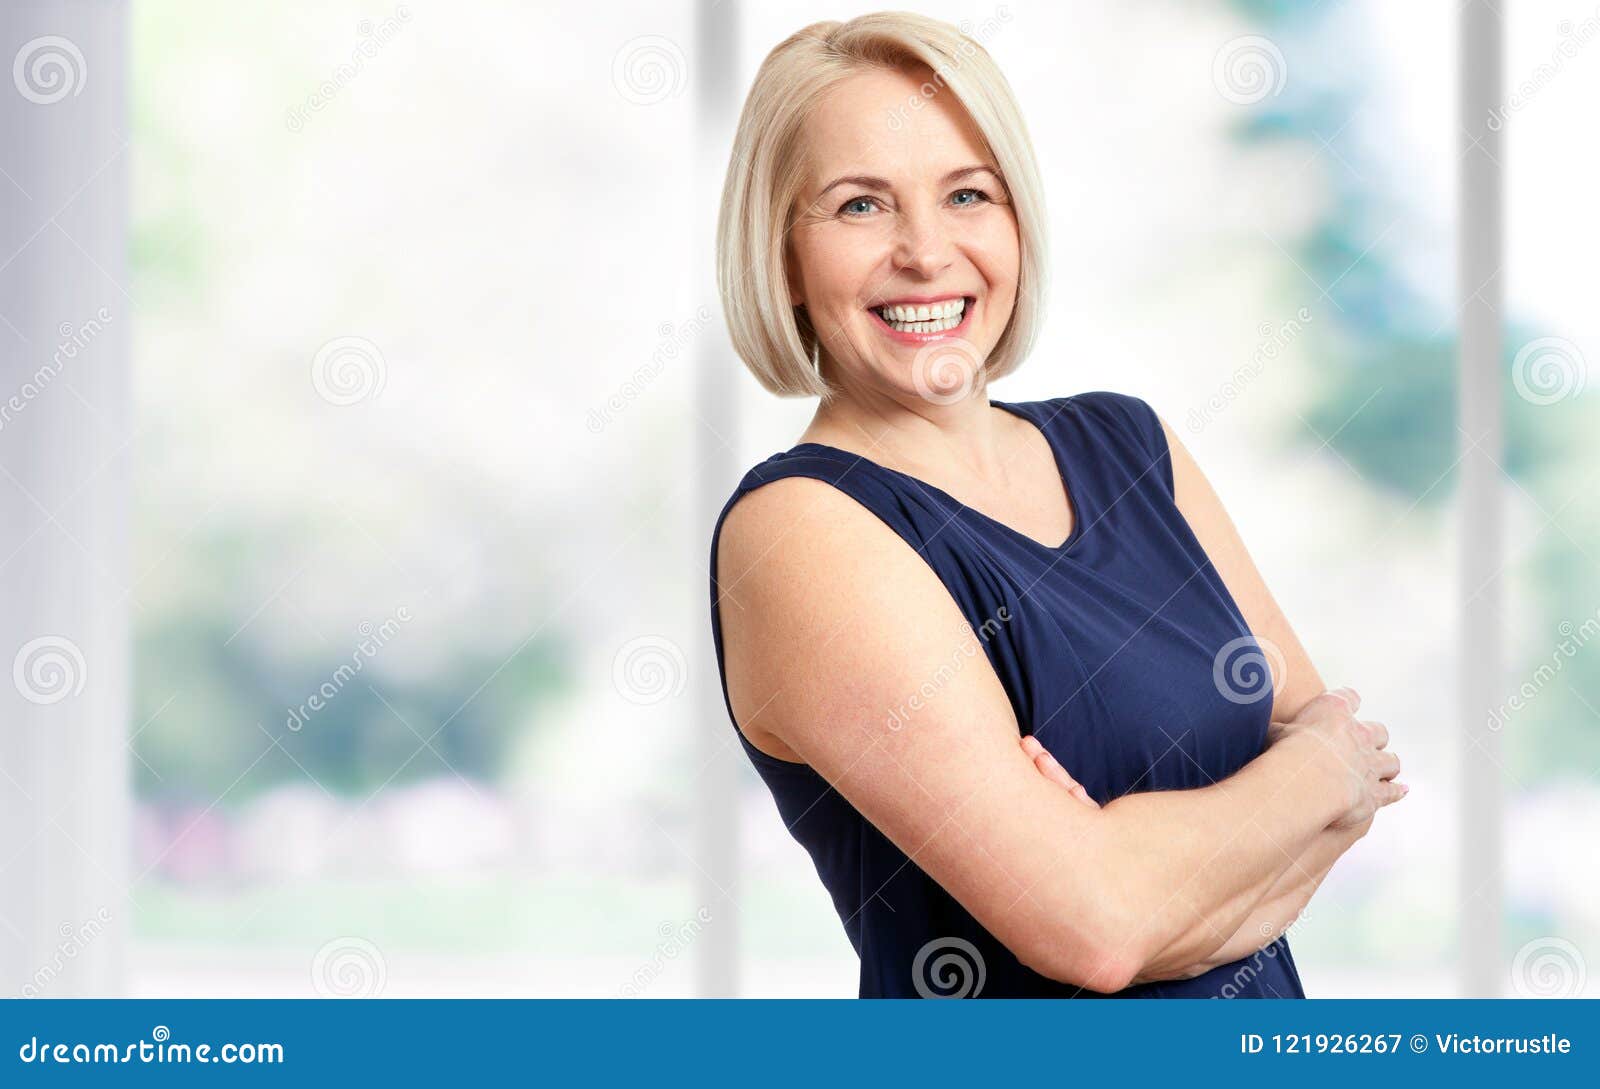 https://thumbs.dreamstime.com/z/attractive-middle-aged-woman-beautiful-smile-near-window-attractive-middle-aged-woman-beautiful-smile-near-121926267.jpg